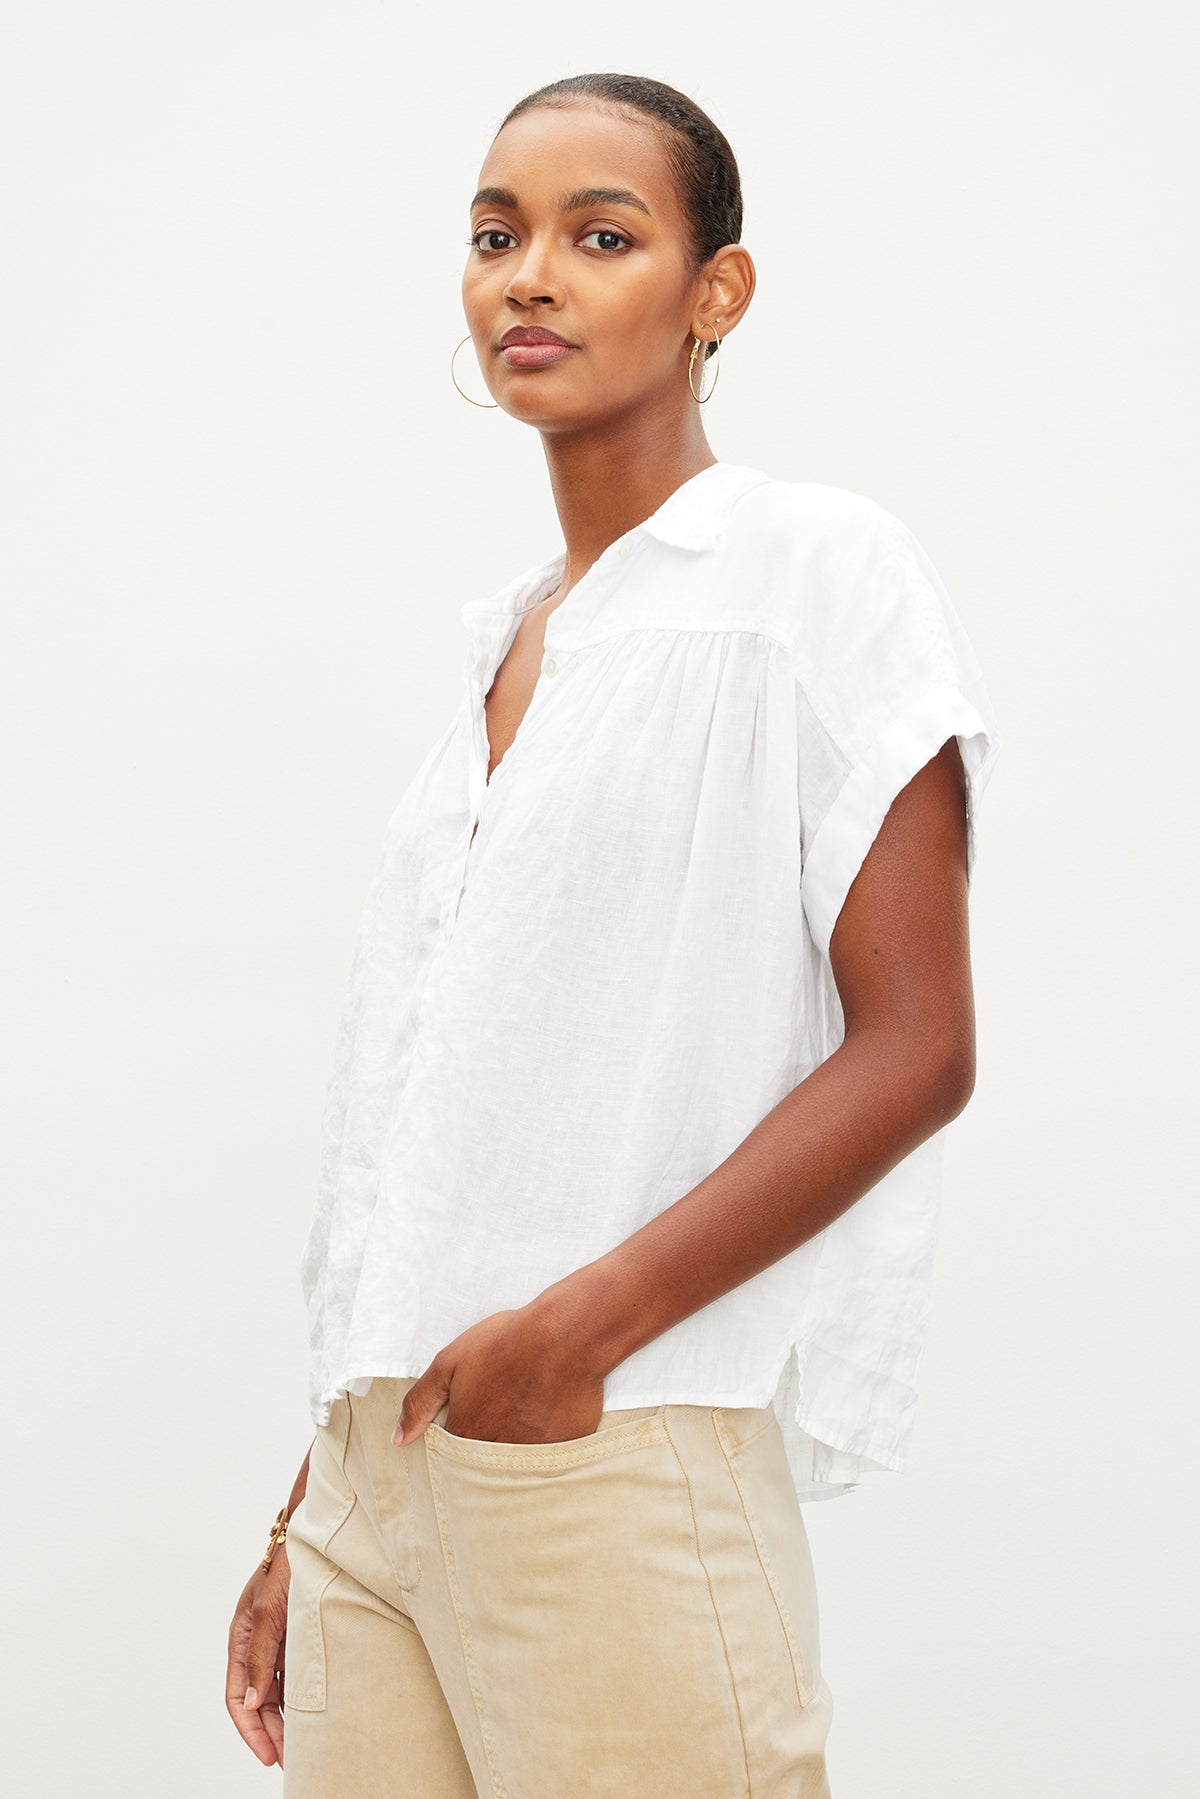 The model is wearing a white ARIA LINEN BUTTON FRONT TOP by Velvet by Graham & Spencer and tan pants, exuding comfort and timeless appeal.-35955415220417